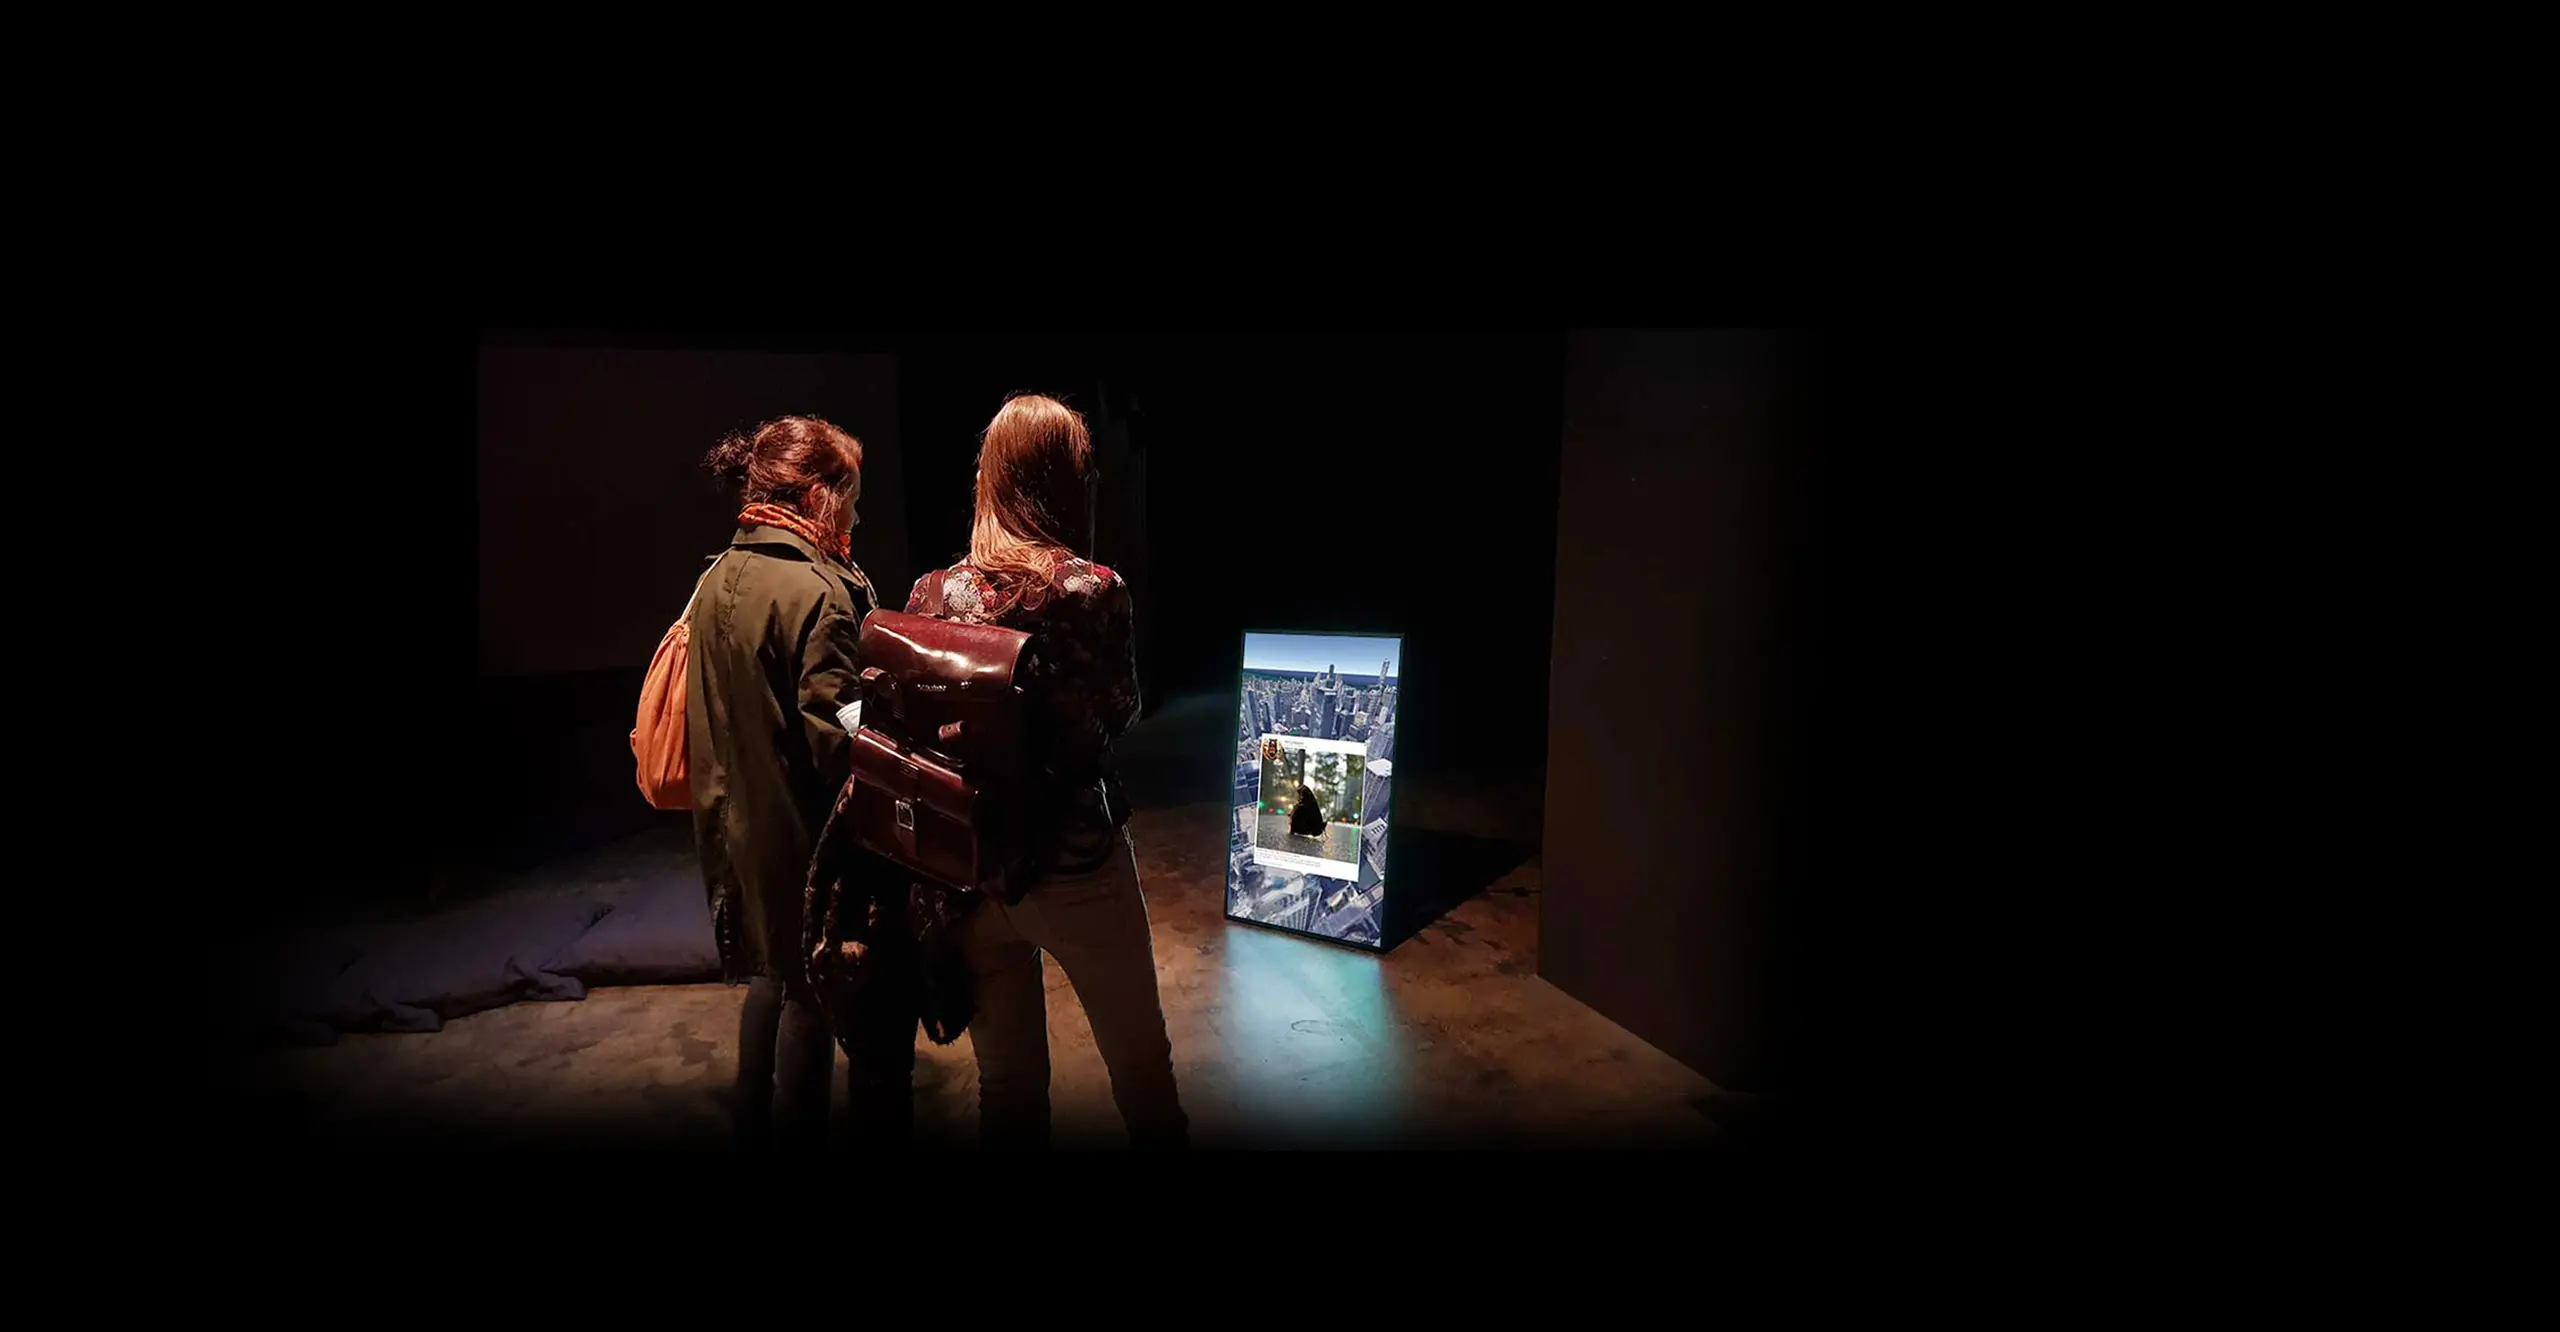 Two people looking at a screen on the floor on a dark exhibition space